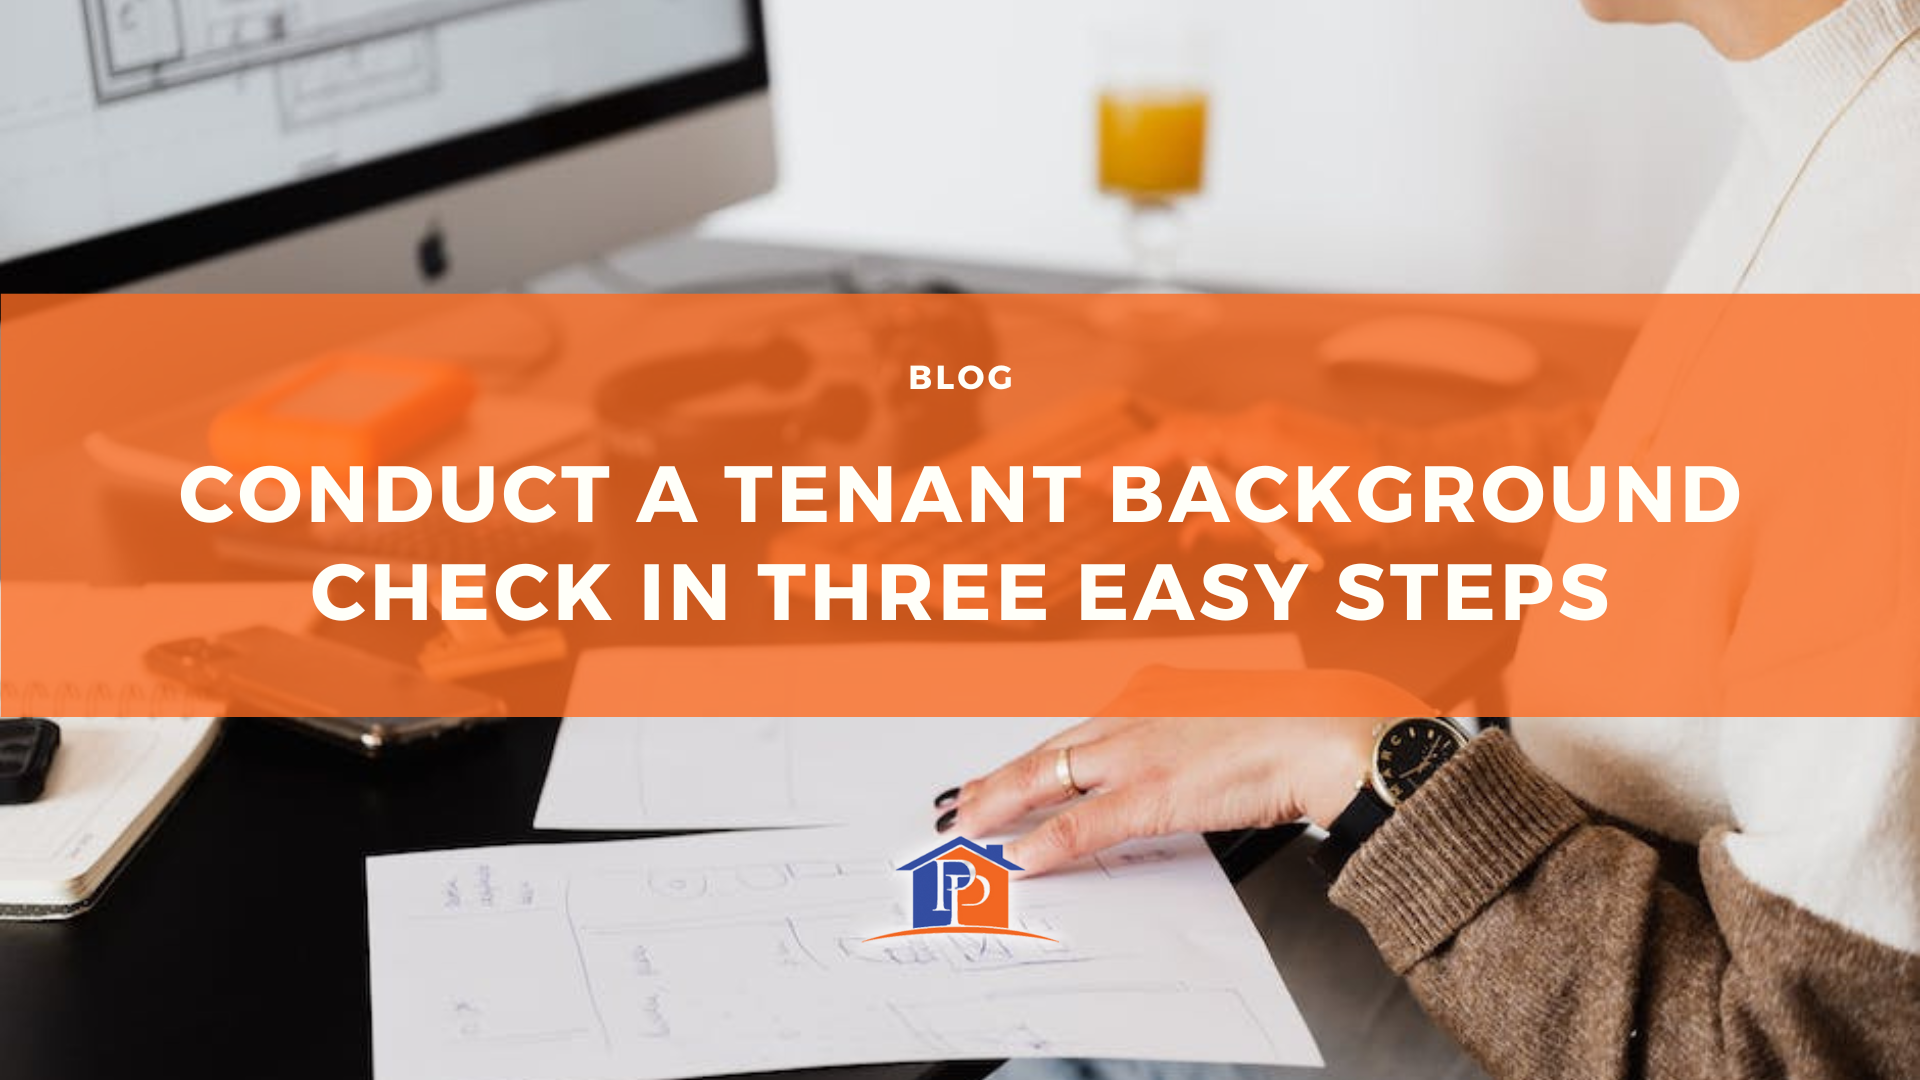 Conduct a Tenant Background Check in Three Easy Steps